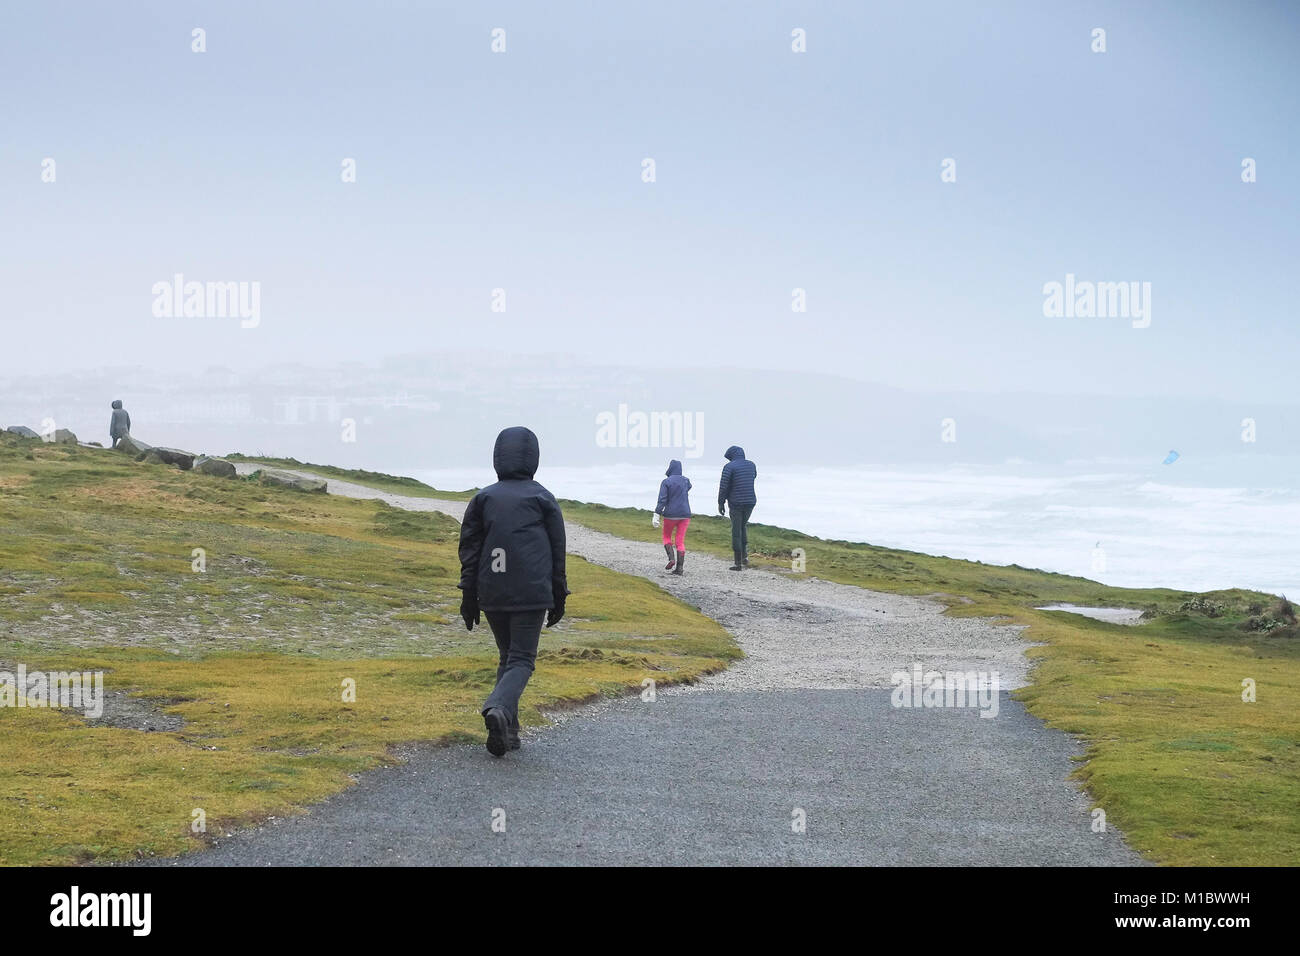 UK Winter weather - People walkers walking on the South West Coast Path during cold wintry weather conditions Newquay Cornwall. Stock Photo